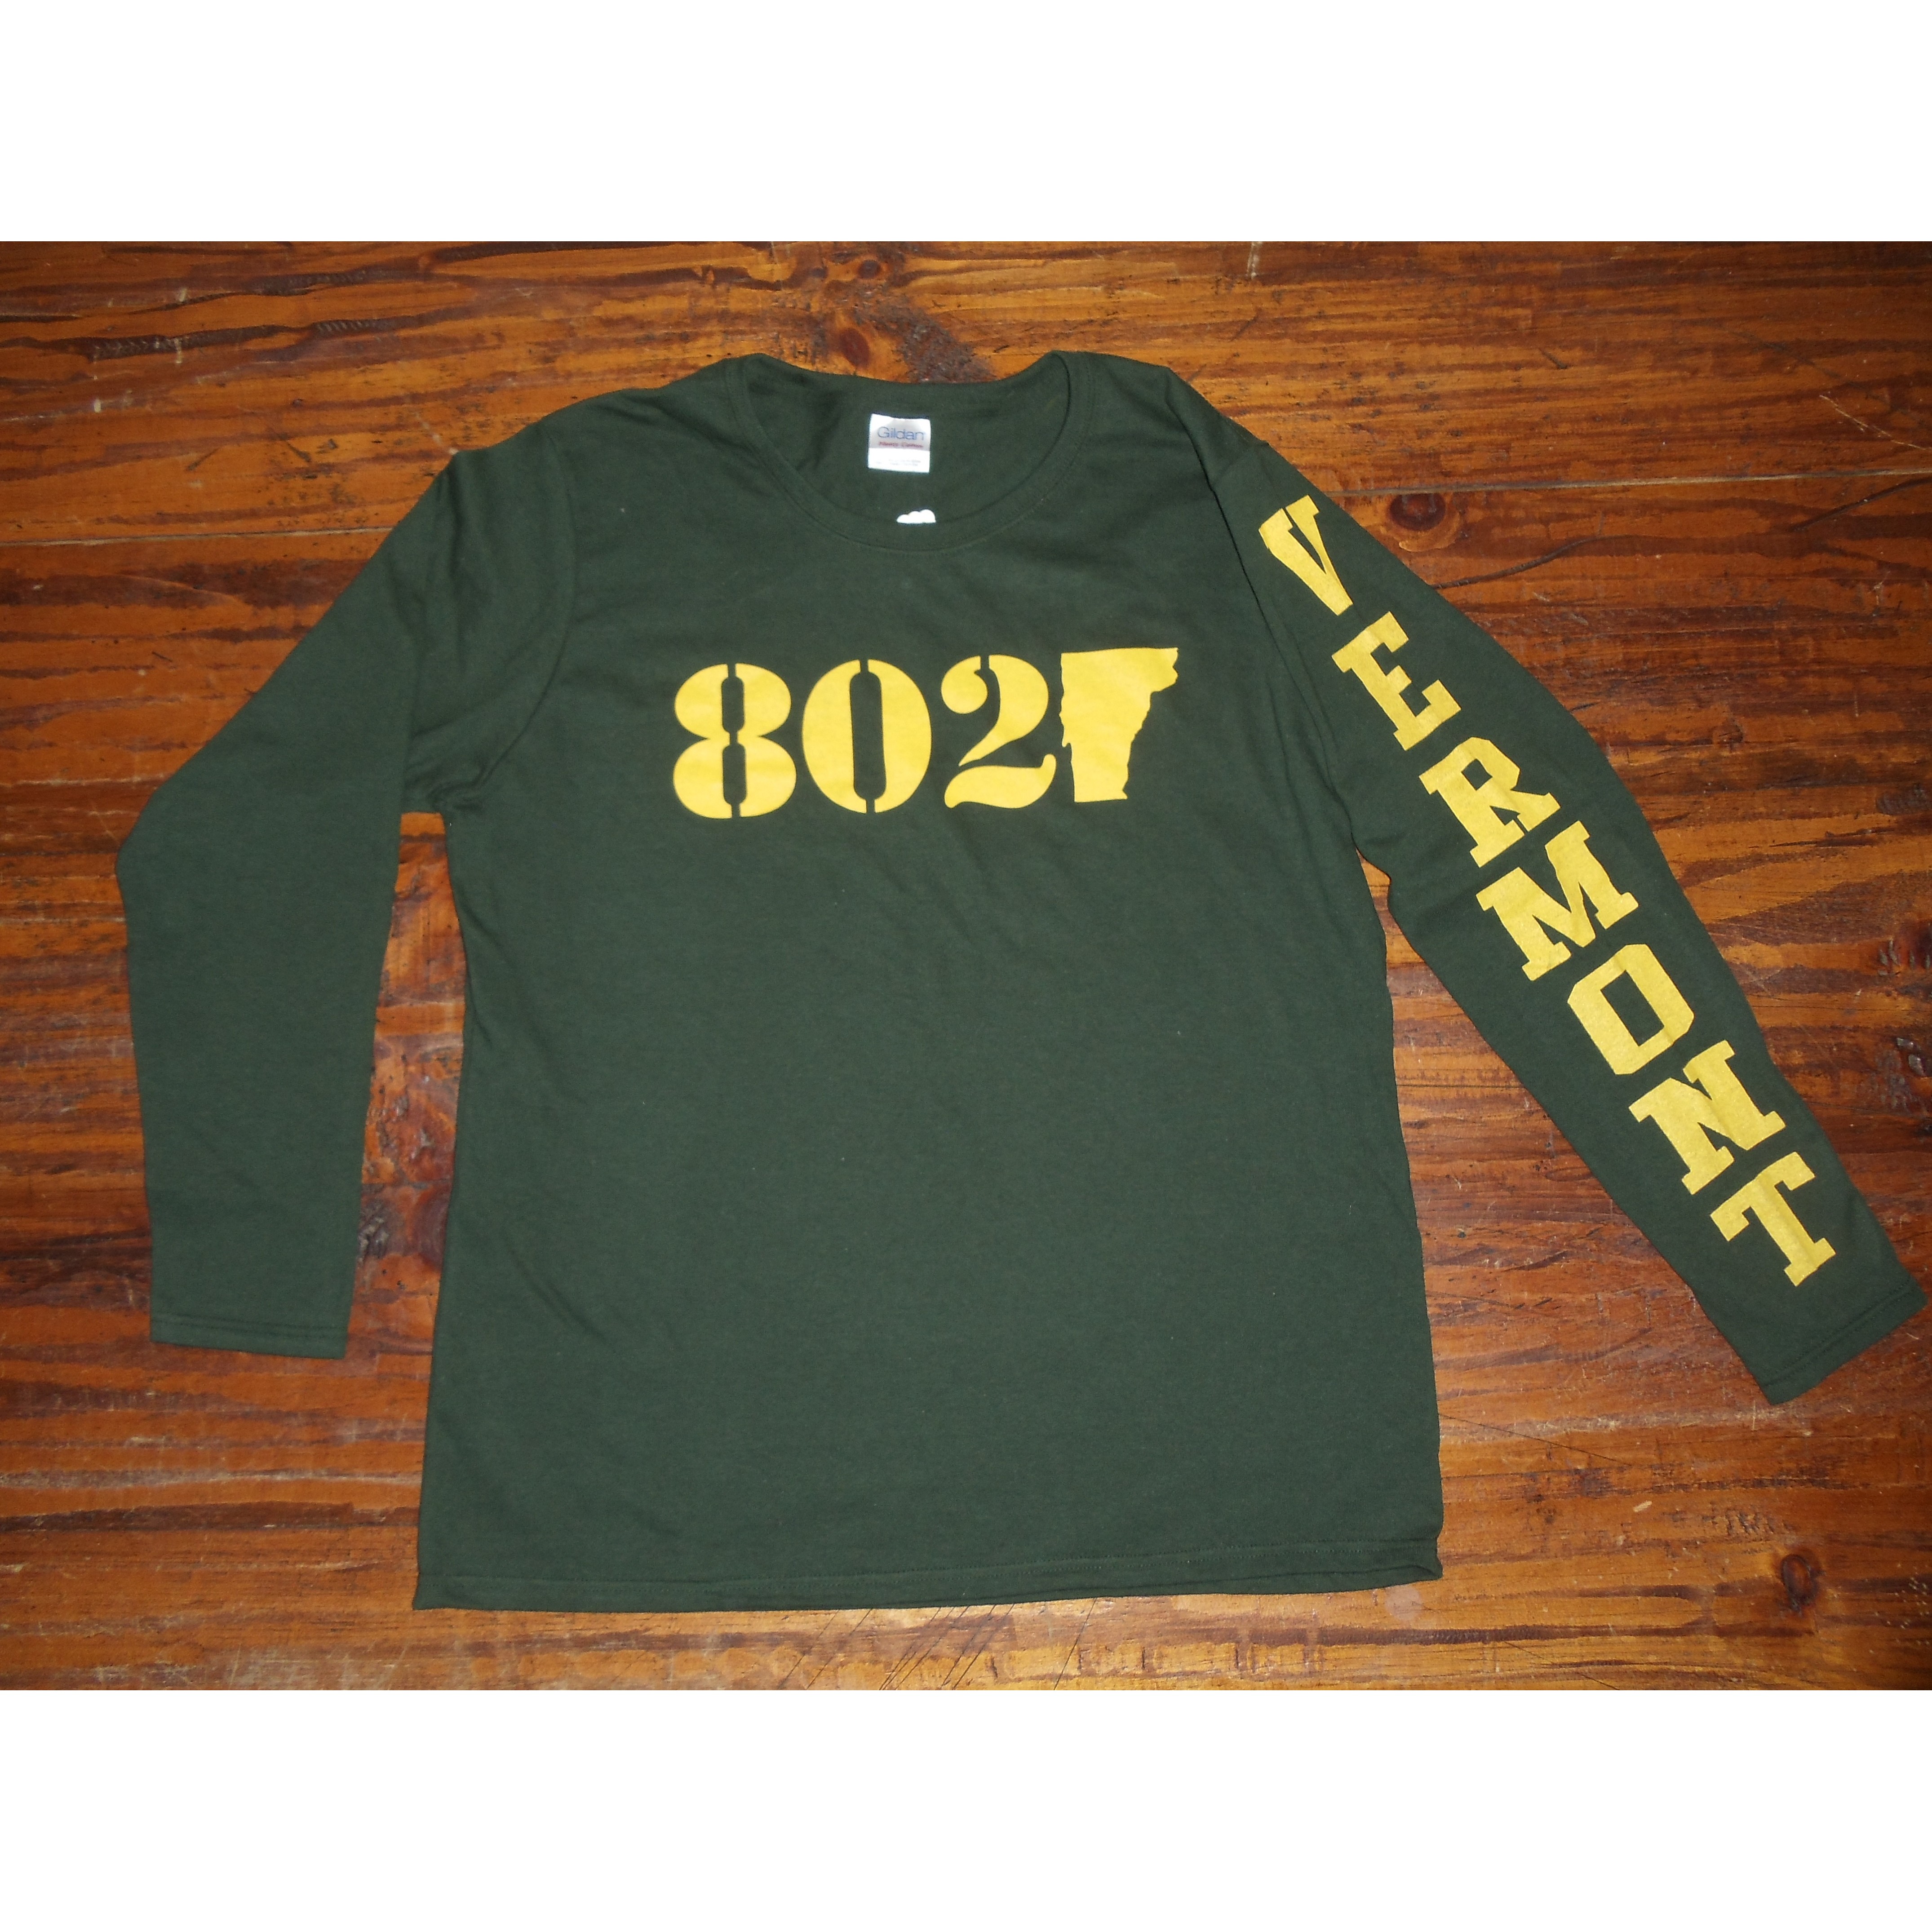 802 802 Classic VT Sleeve L/S (Ladies) (Forest/Yellow)